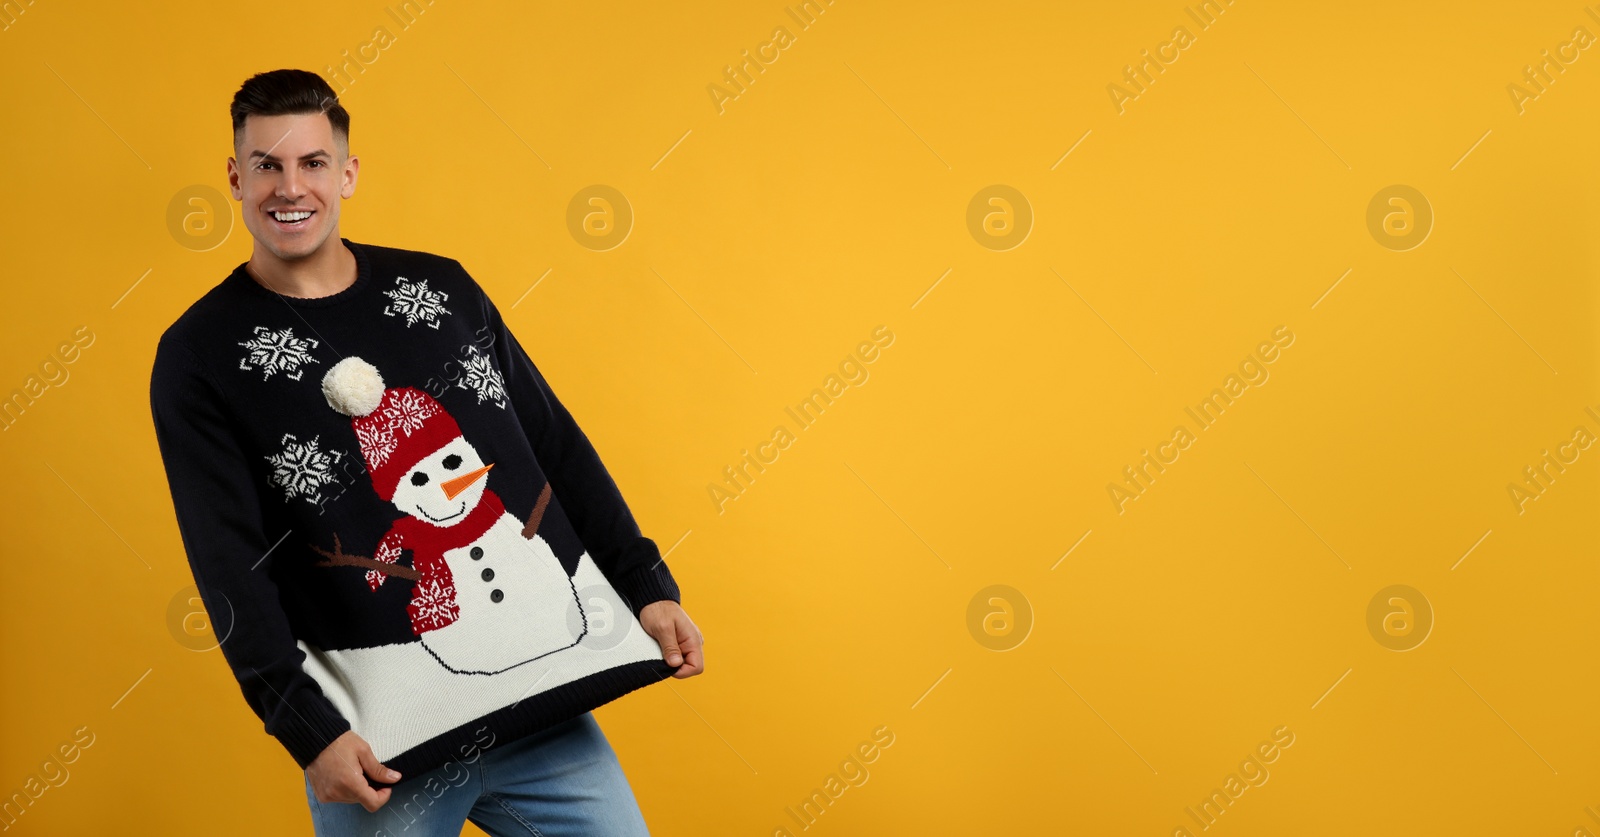 Photo of Happy man showing his Christmas sweater on yellow background